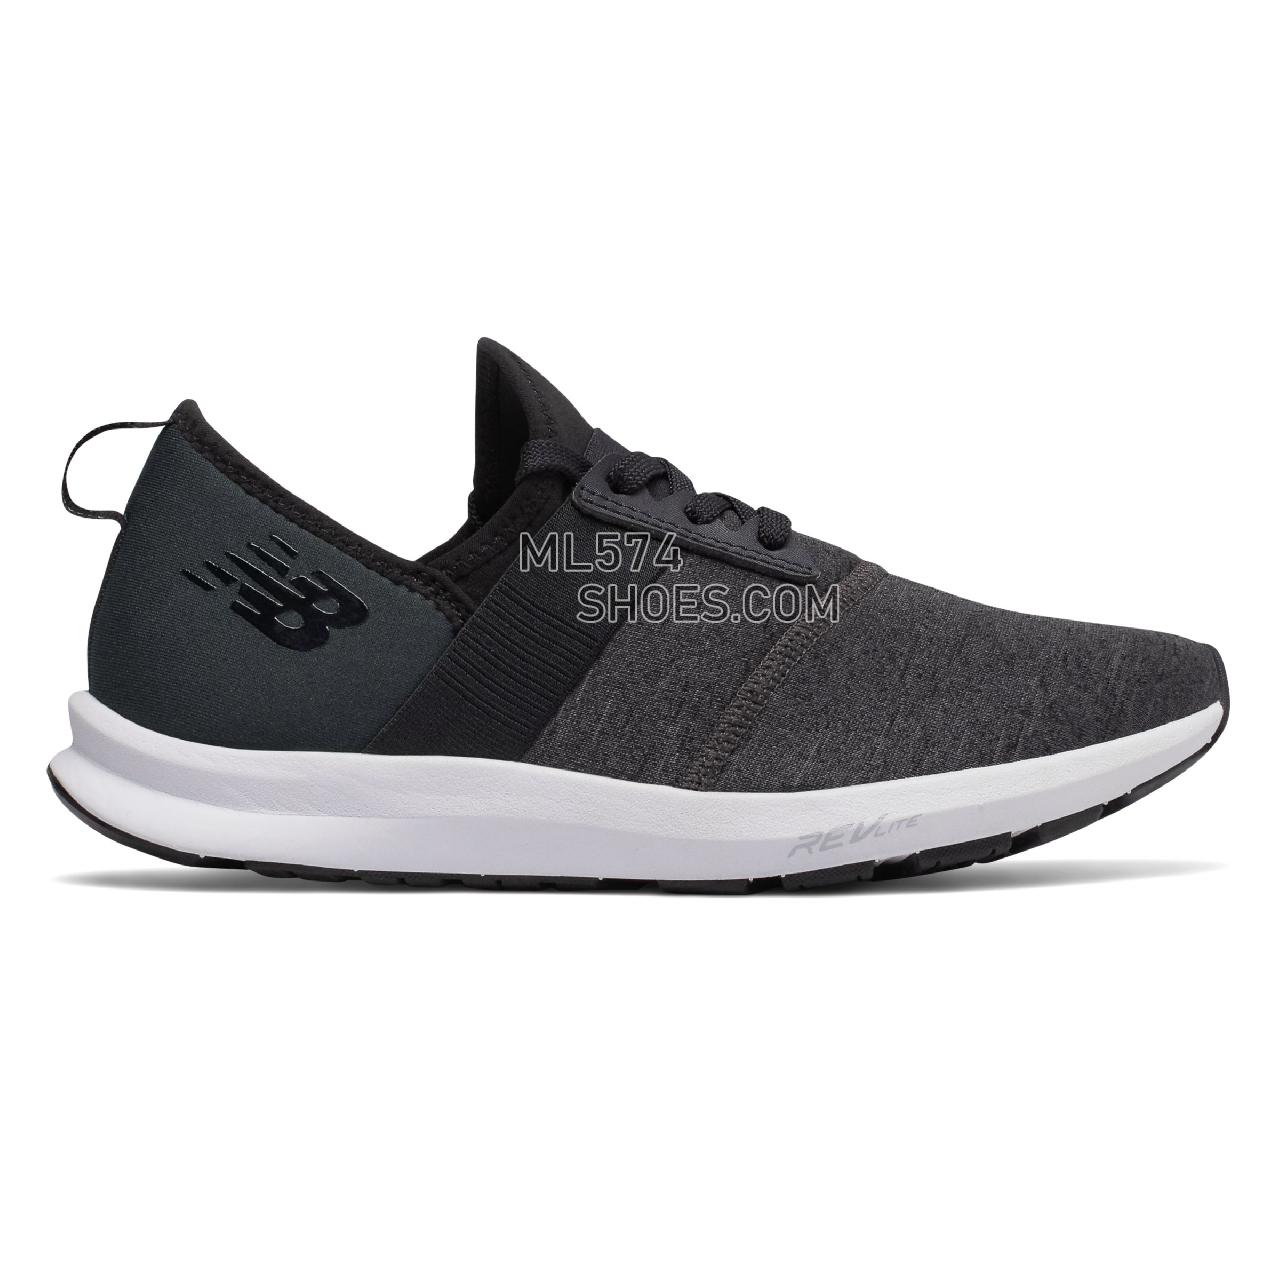 New Balance FuelCore NERGIZE - Women's  - X-training Black with White - WXNRGHB